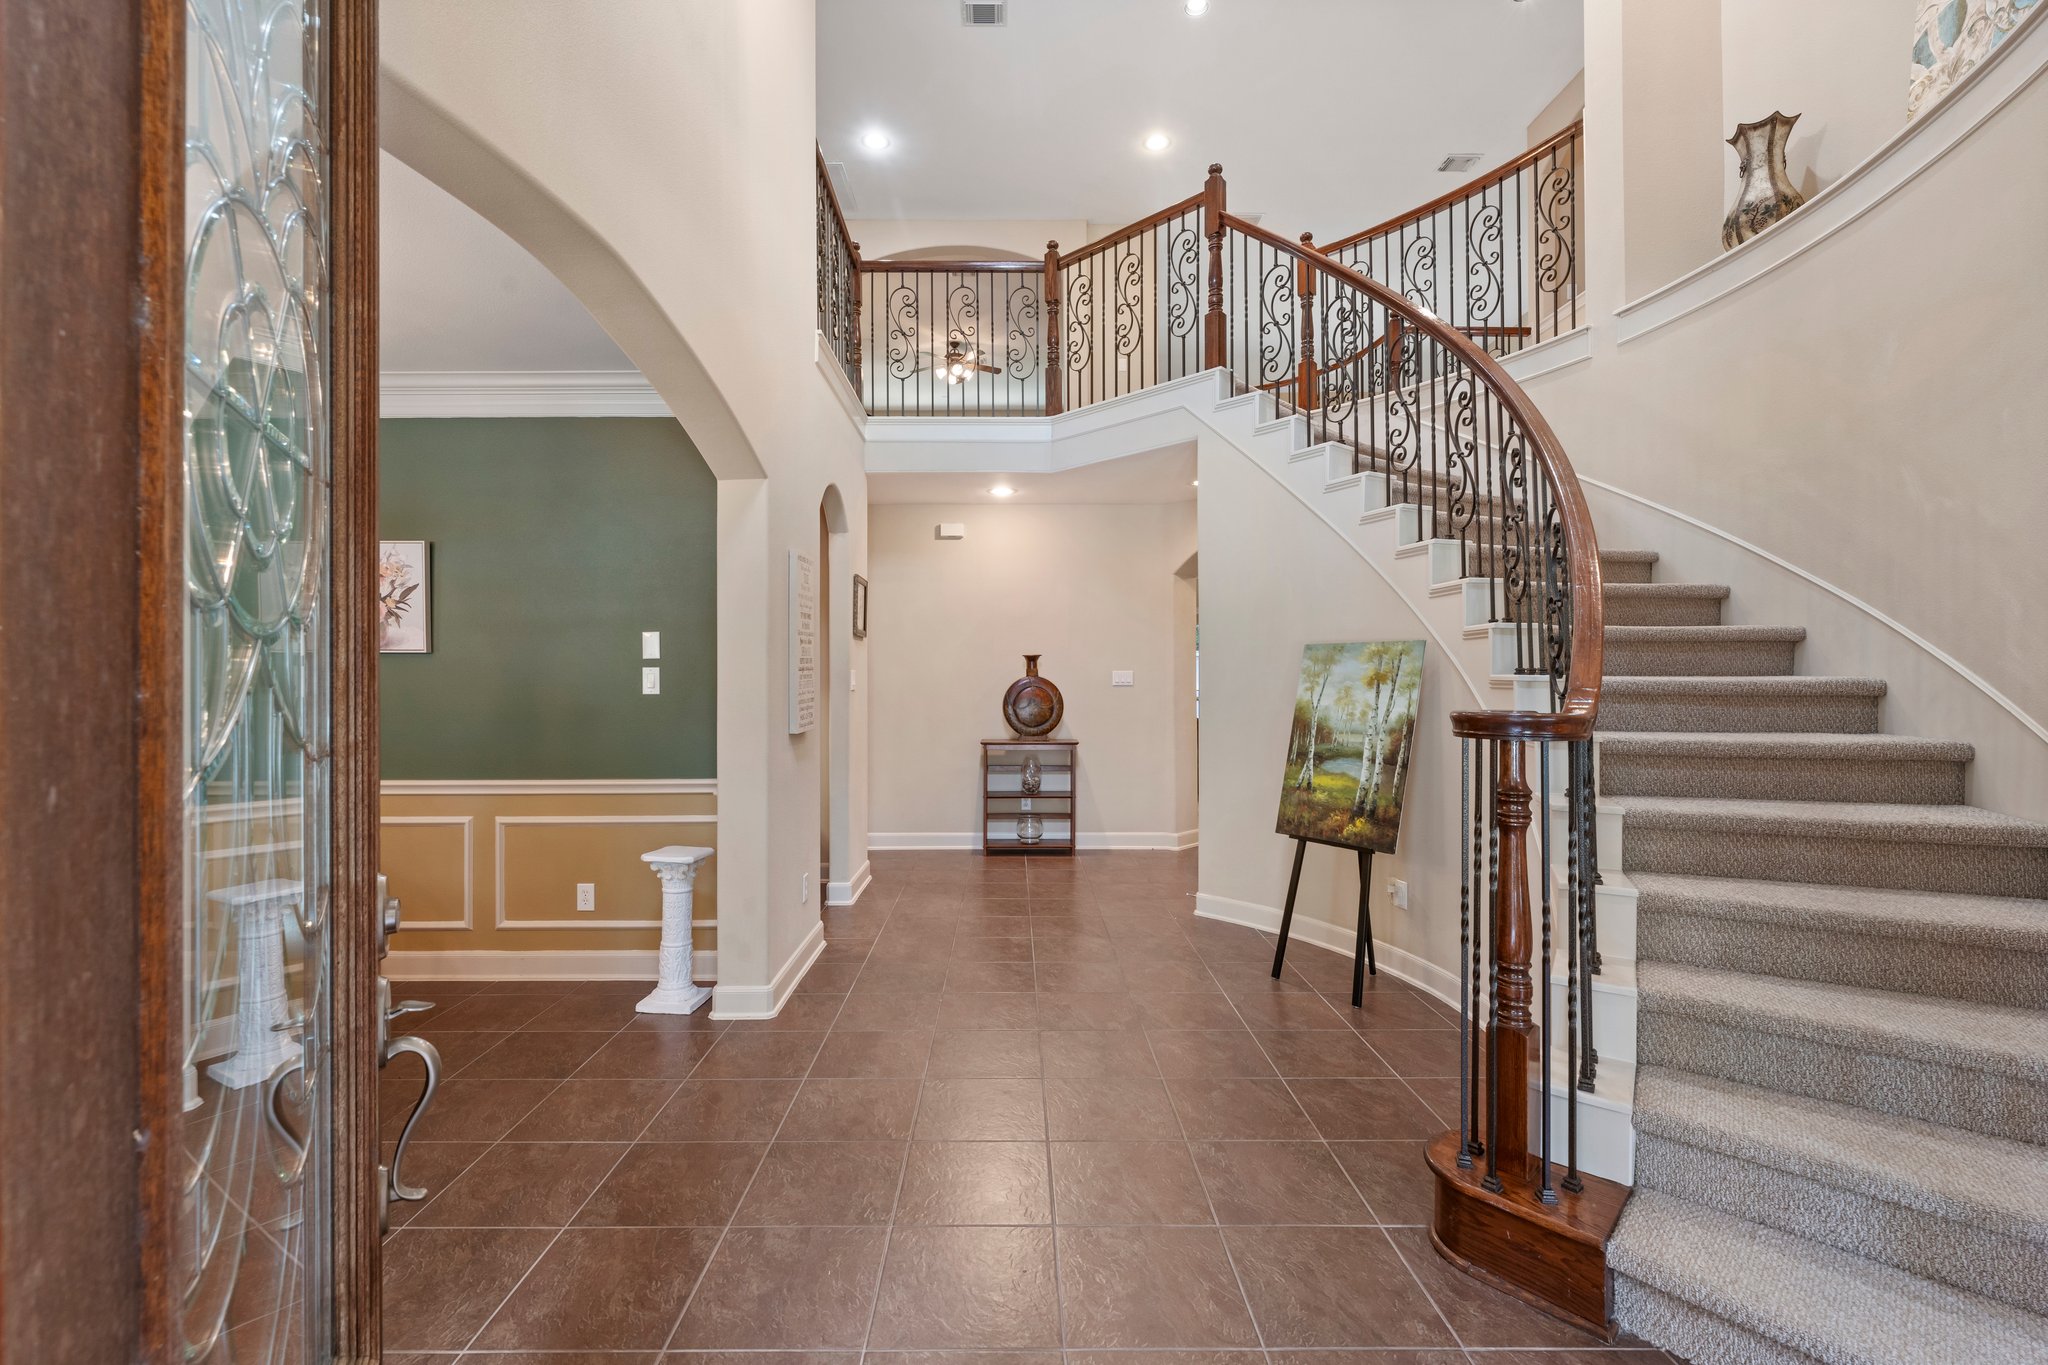 Stunning 2 story entry with soaring ceilings, spiral staircase, Juliet balcony, decorative art niches, and coat closet.